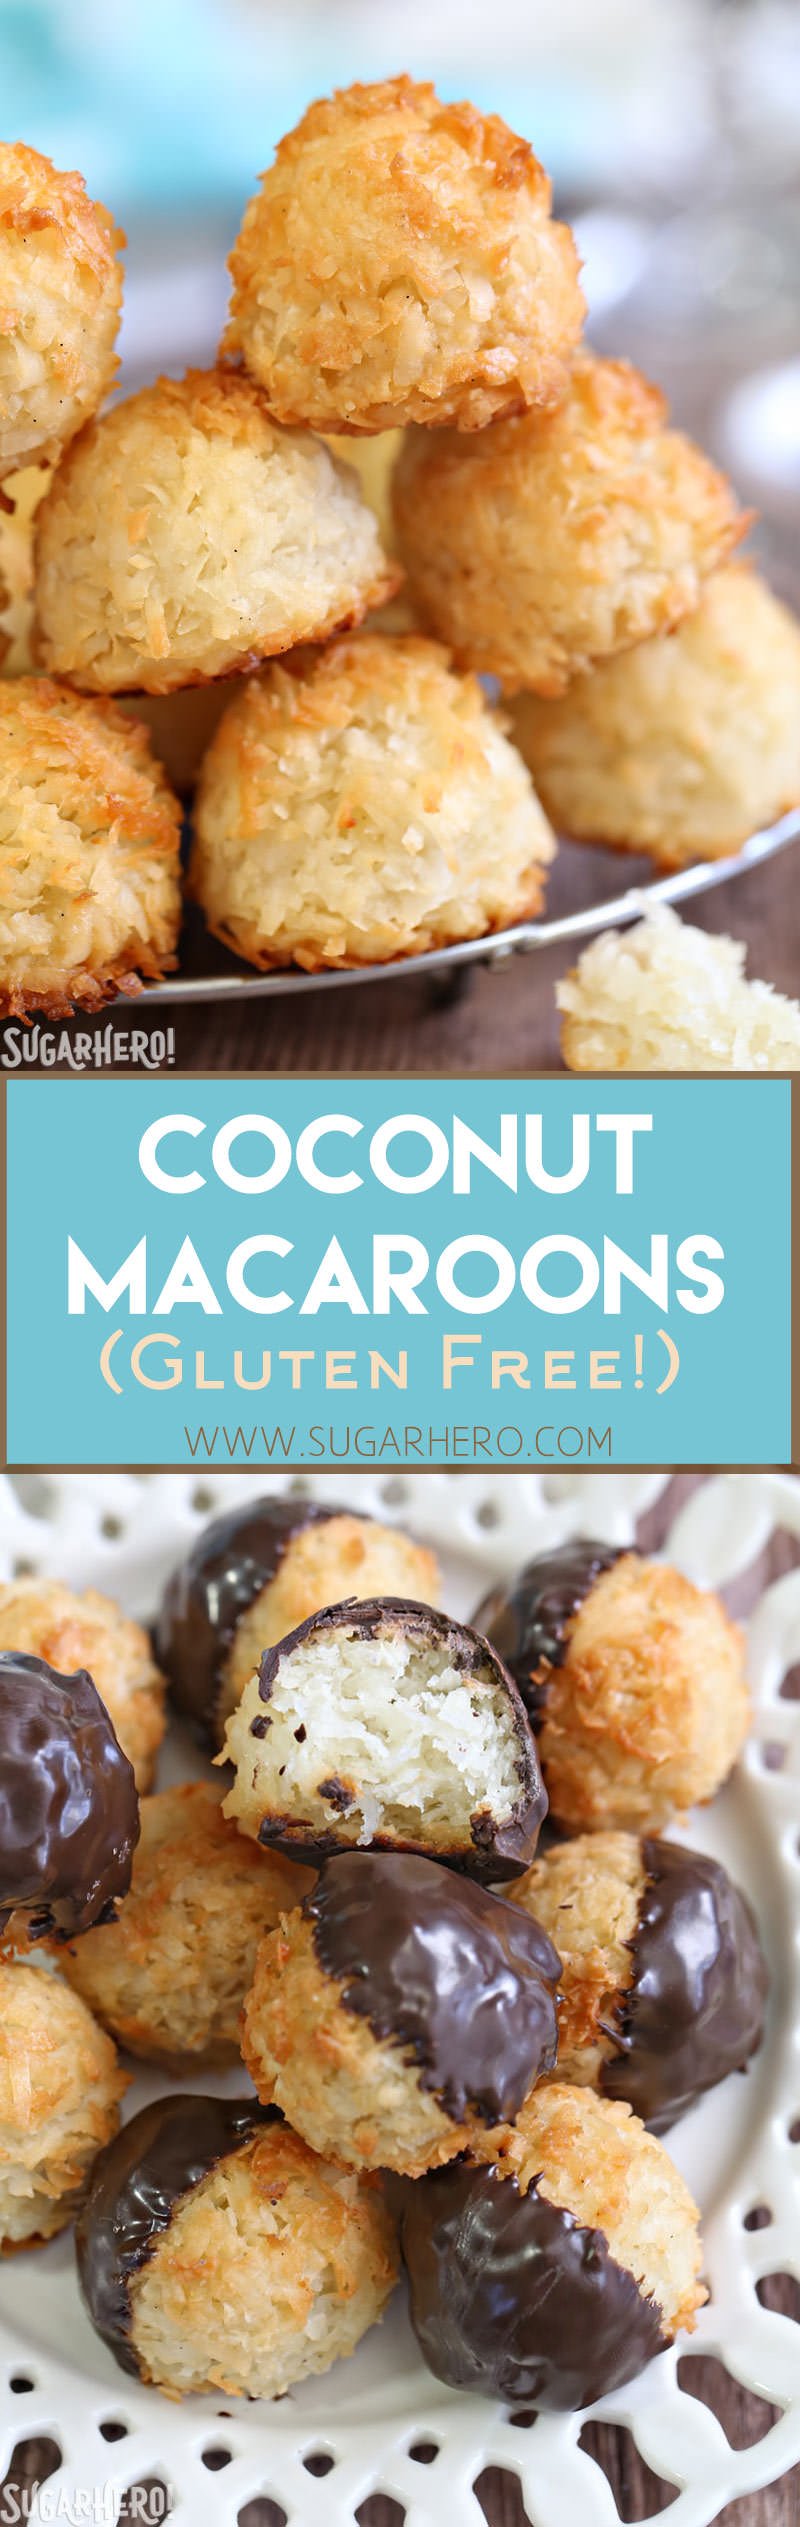 Coconut Macaroons - gluten-free coconut cookies made with just a handful of ingredients! Crispy on the outside, soft and chewy on the inside. | From SugarHero.com